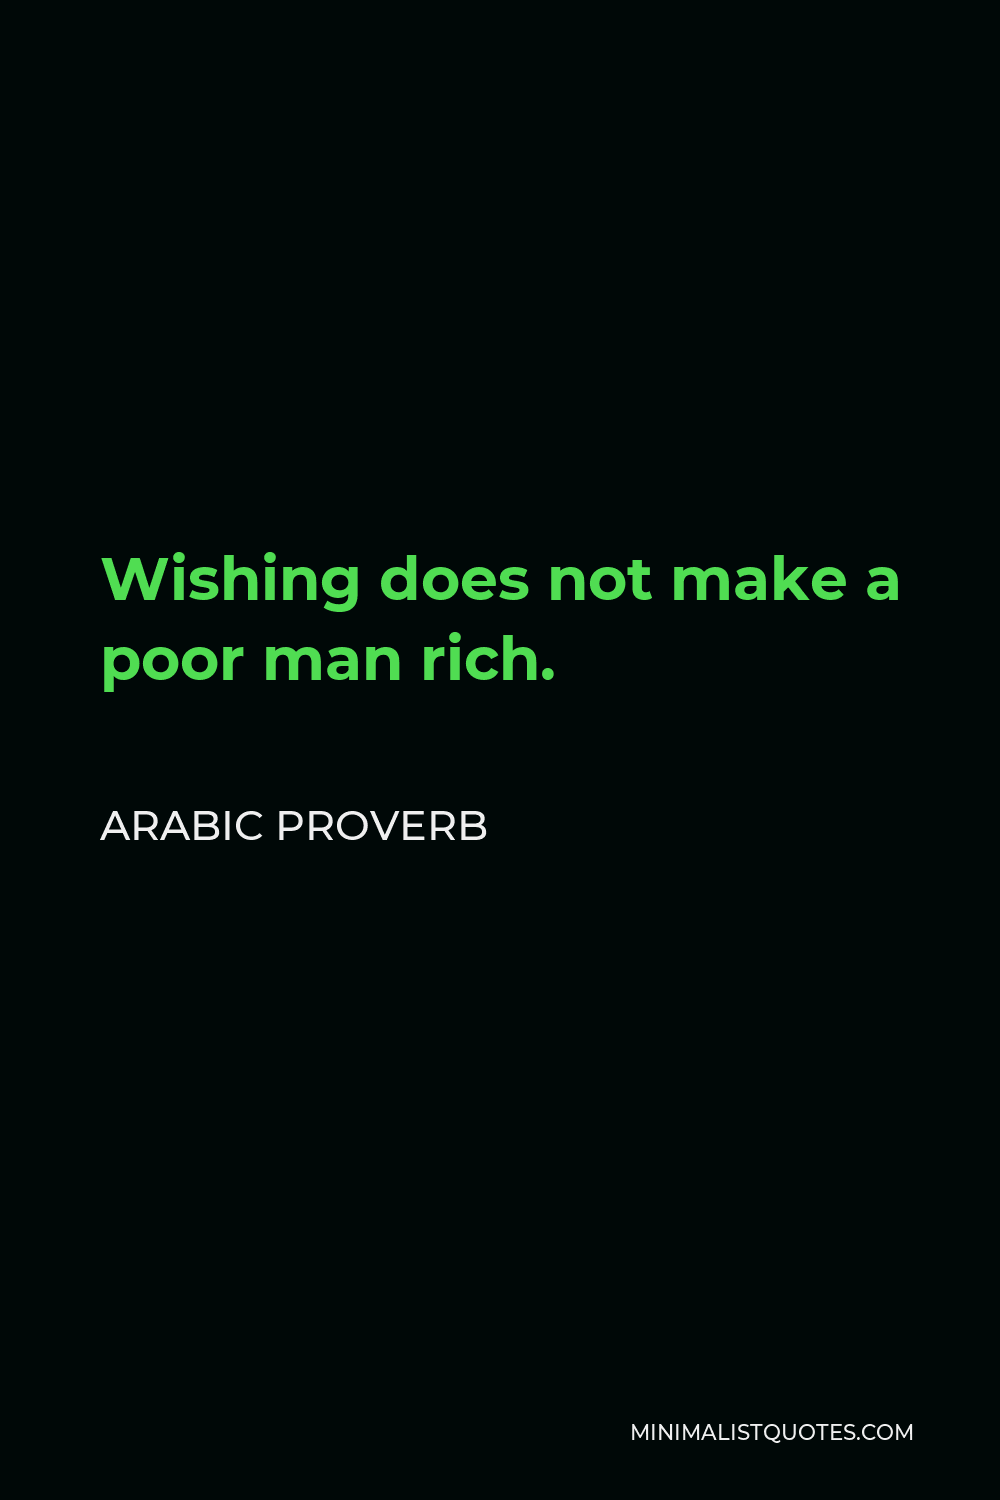 Arabic Proverb Quote - Wishing does not make a poor man rich.